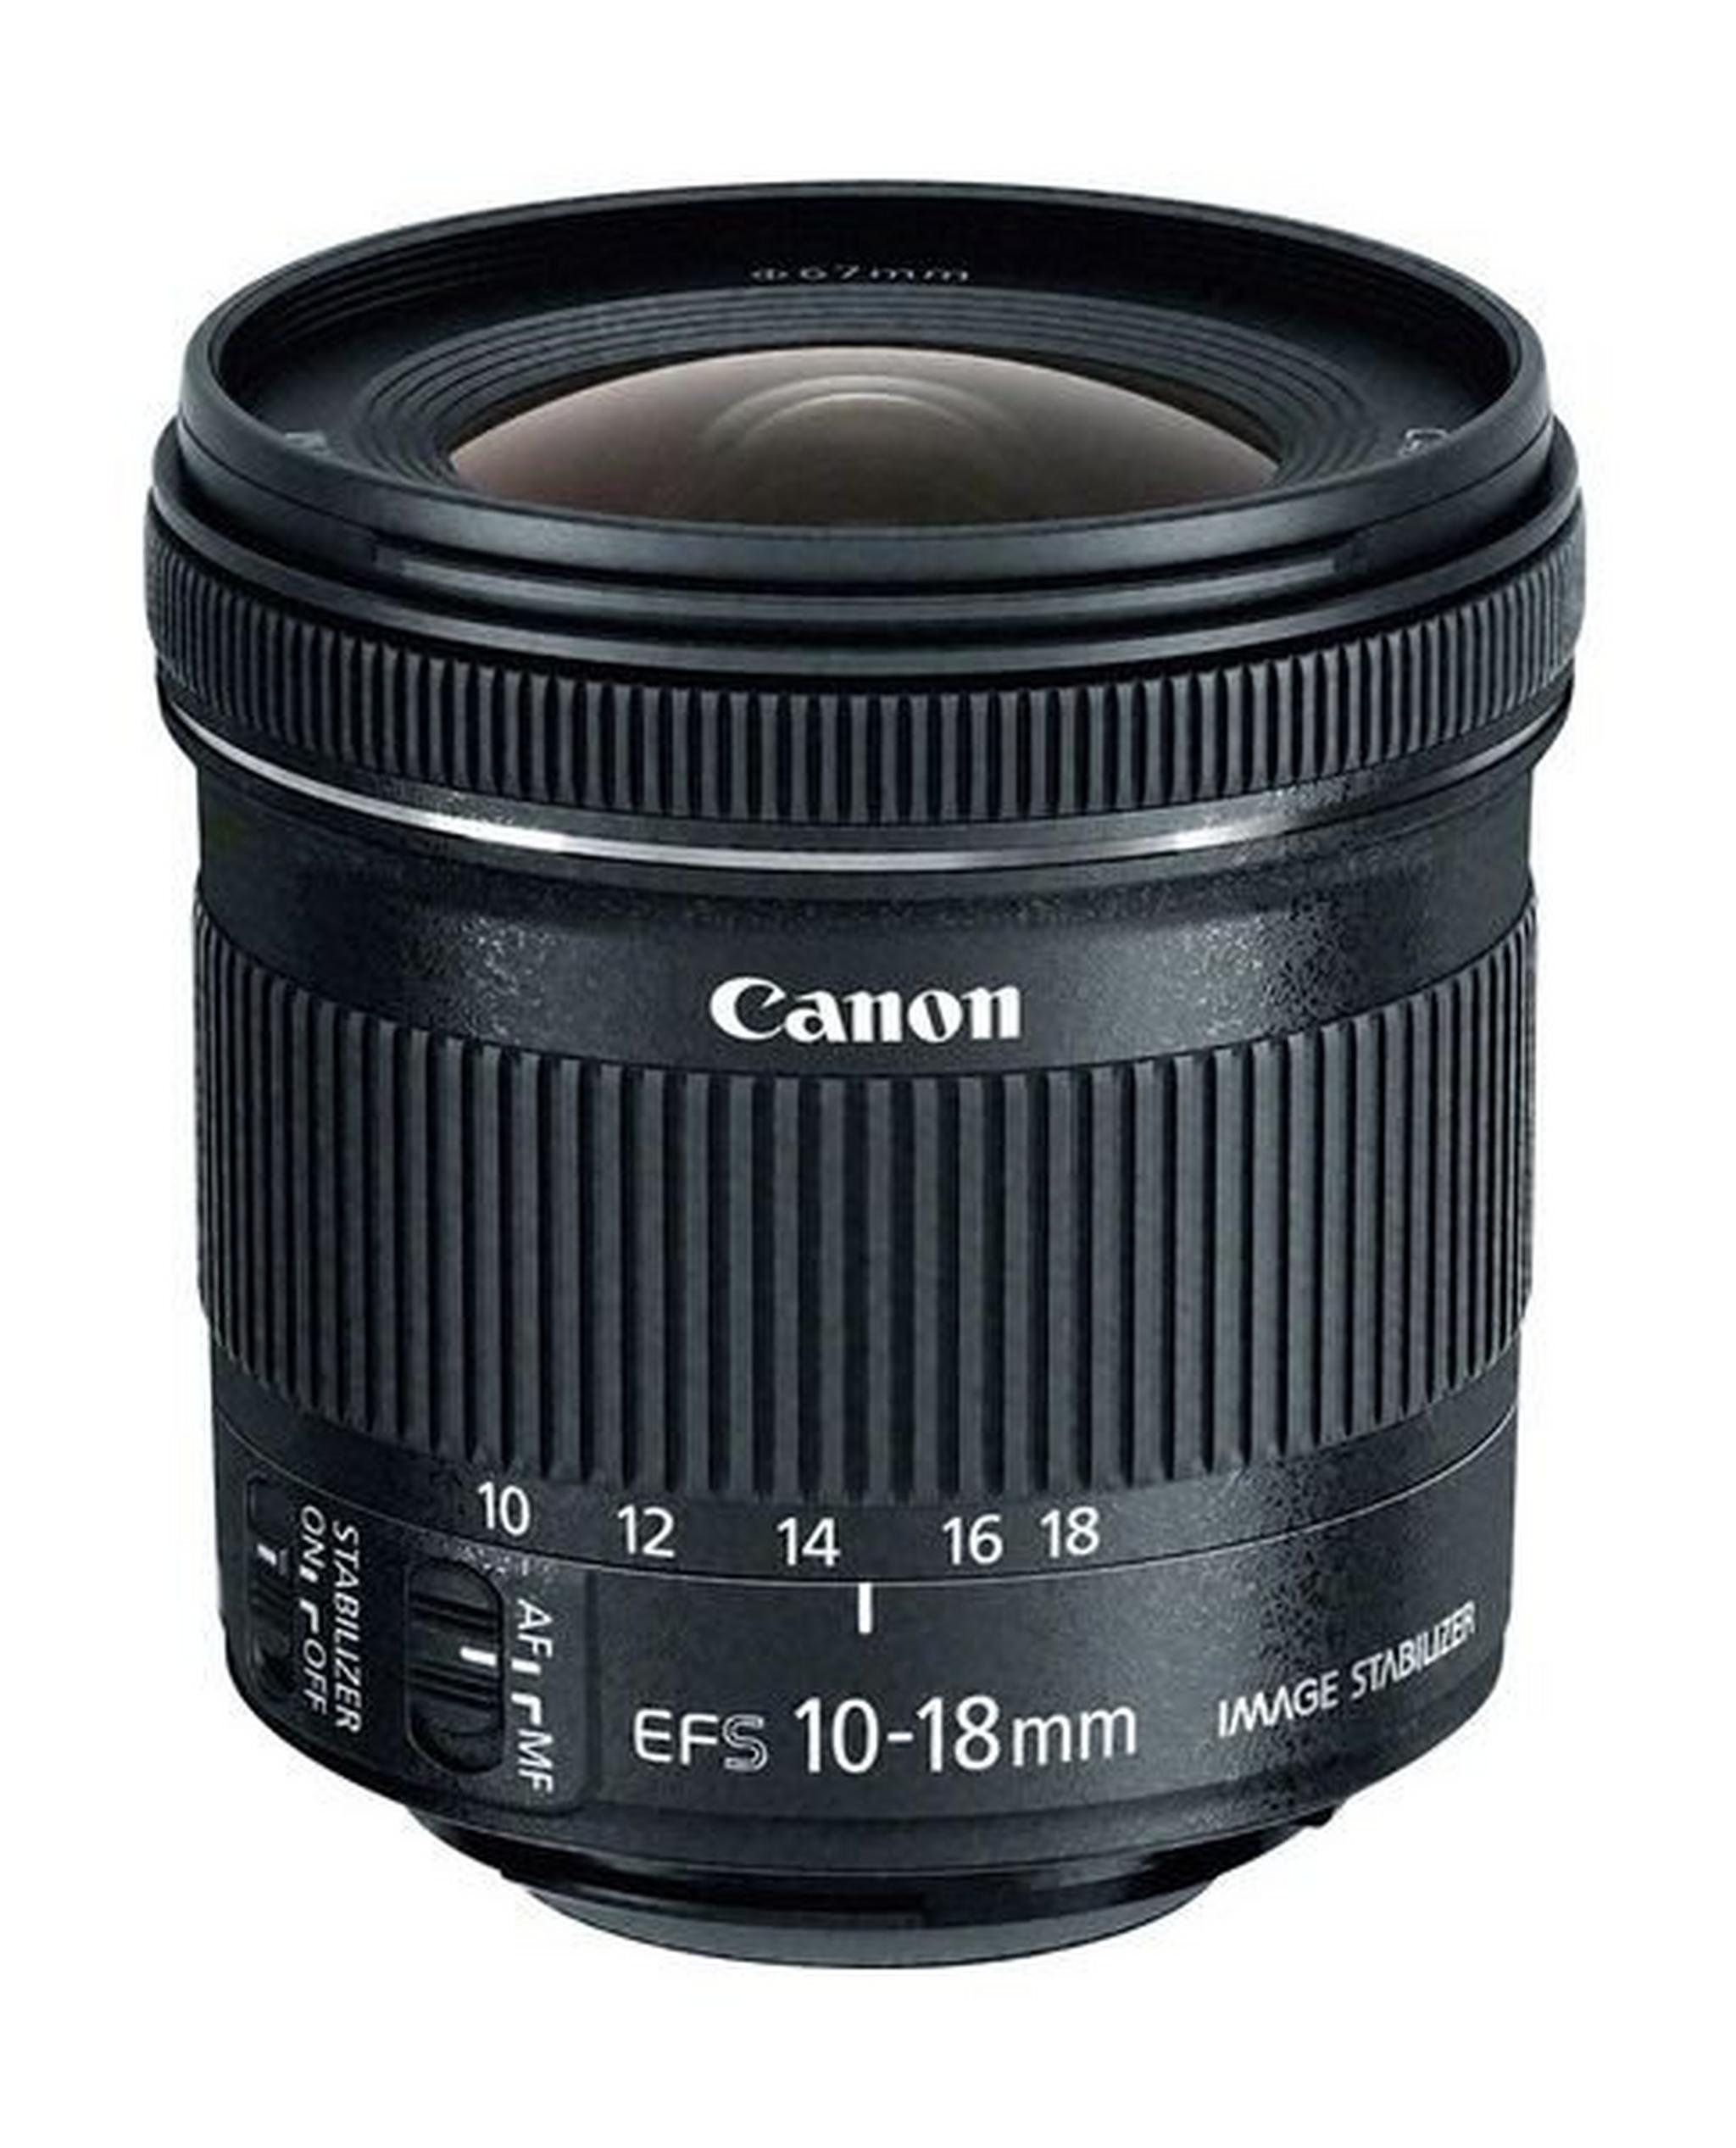 Canon EF-S 10-18mm f/4.5-5.6 IS STM Lens Ultra Wide